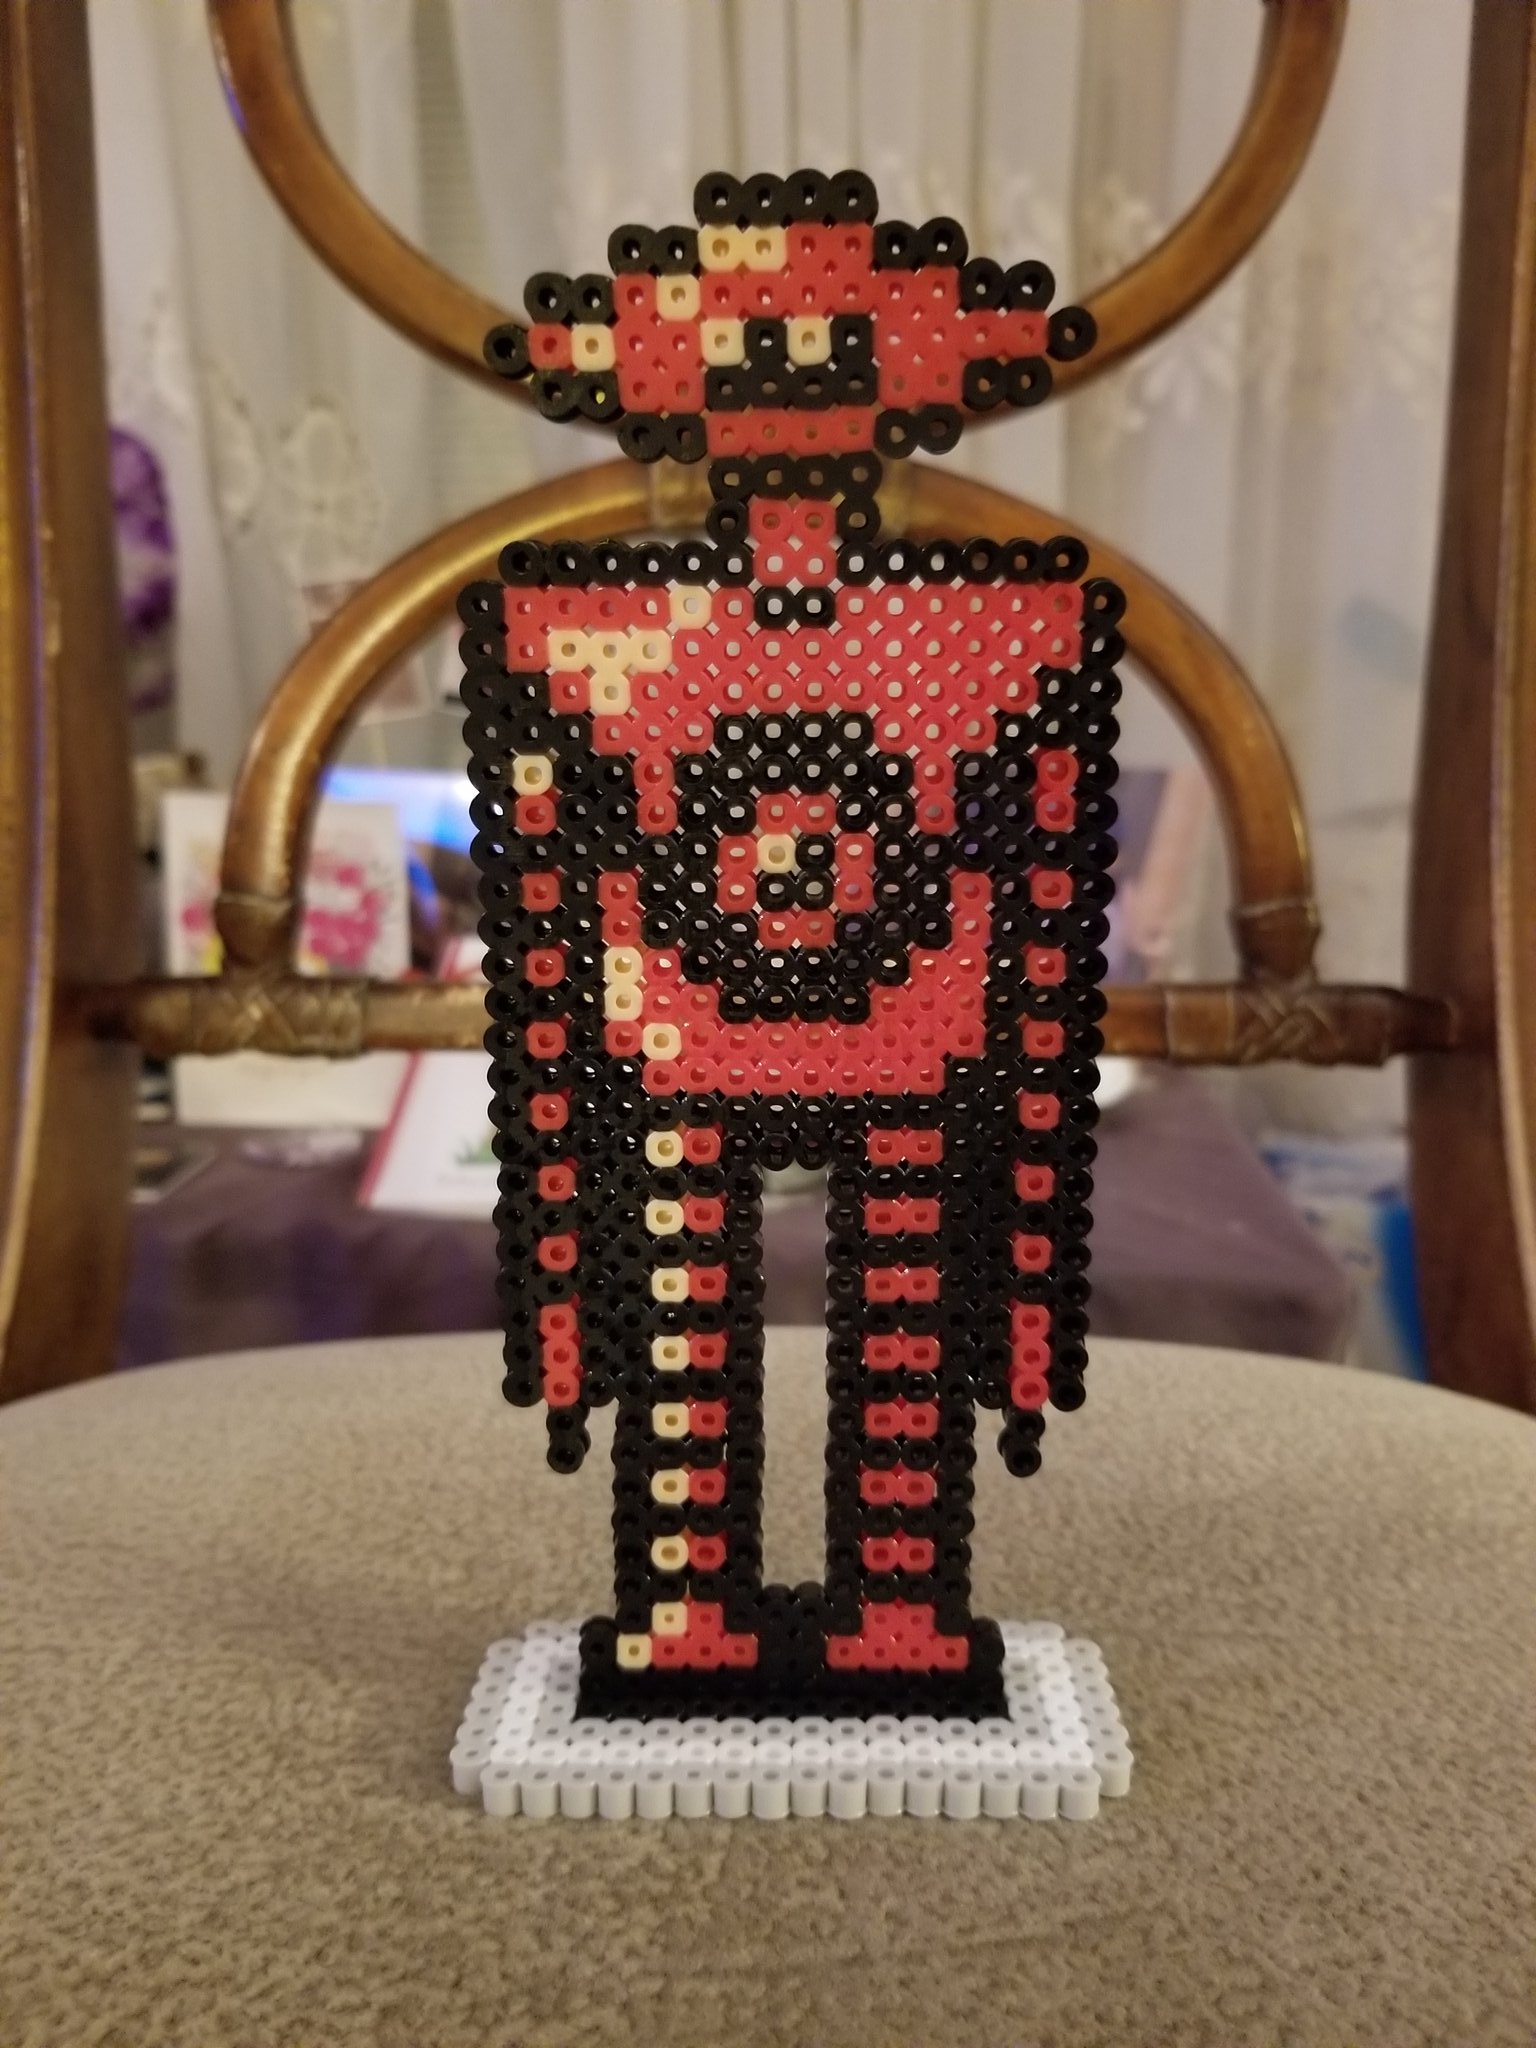 Perleopolis on Twitter: "Finished this standing perler of Eve the Robot EarthBound Beginnings. #perler #perlerbeads #mother1 #earthboundbeginnings / Twitter